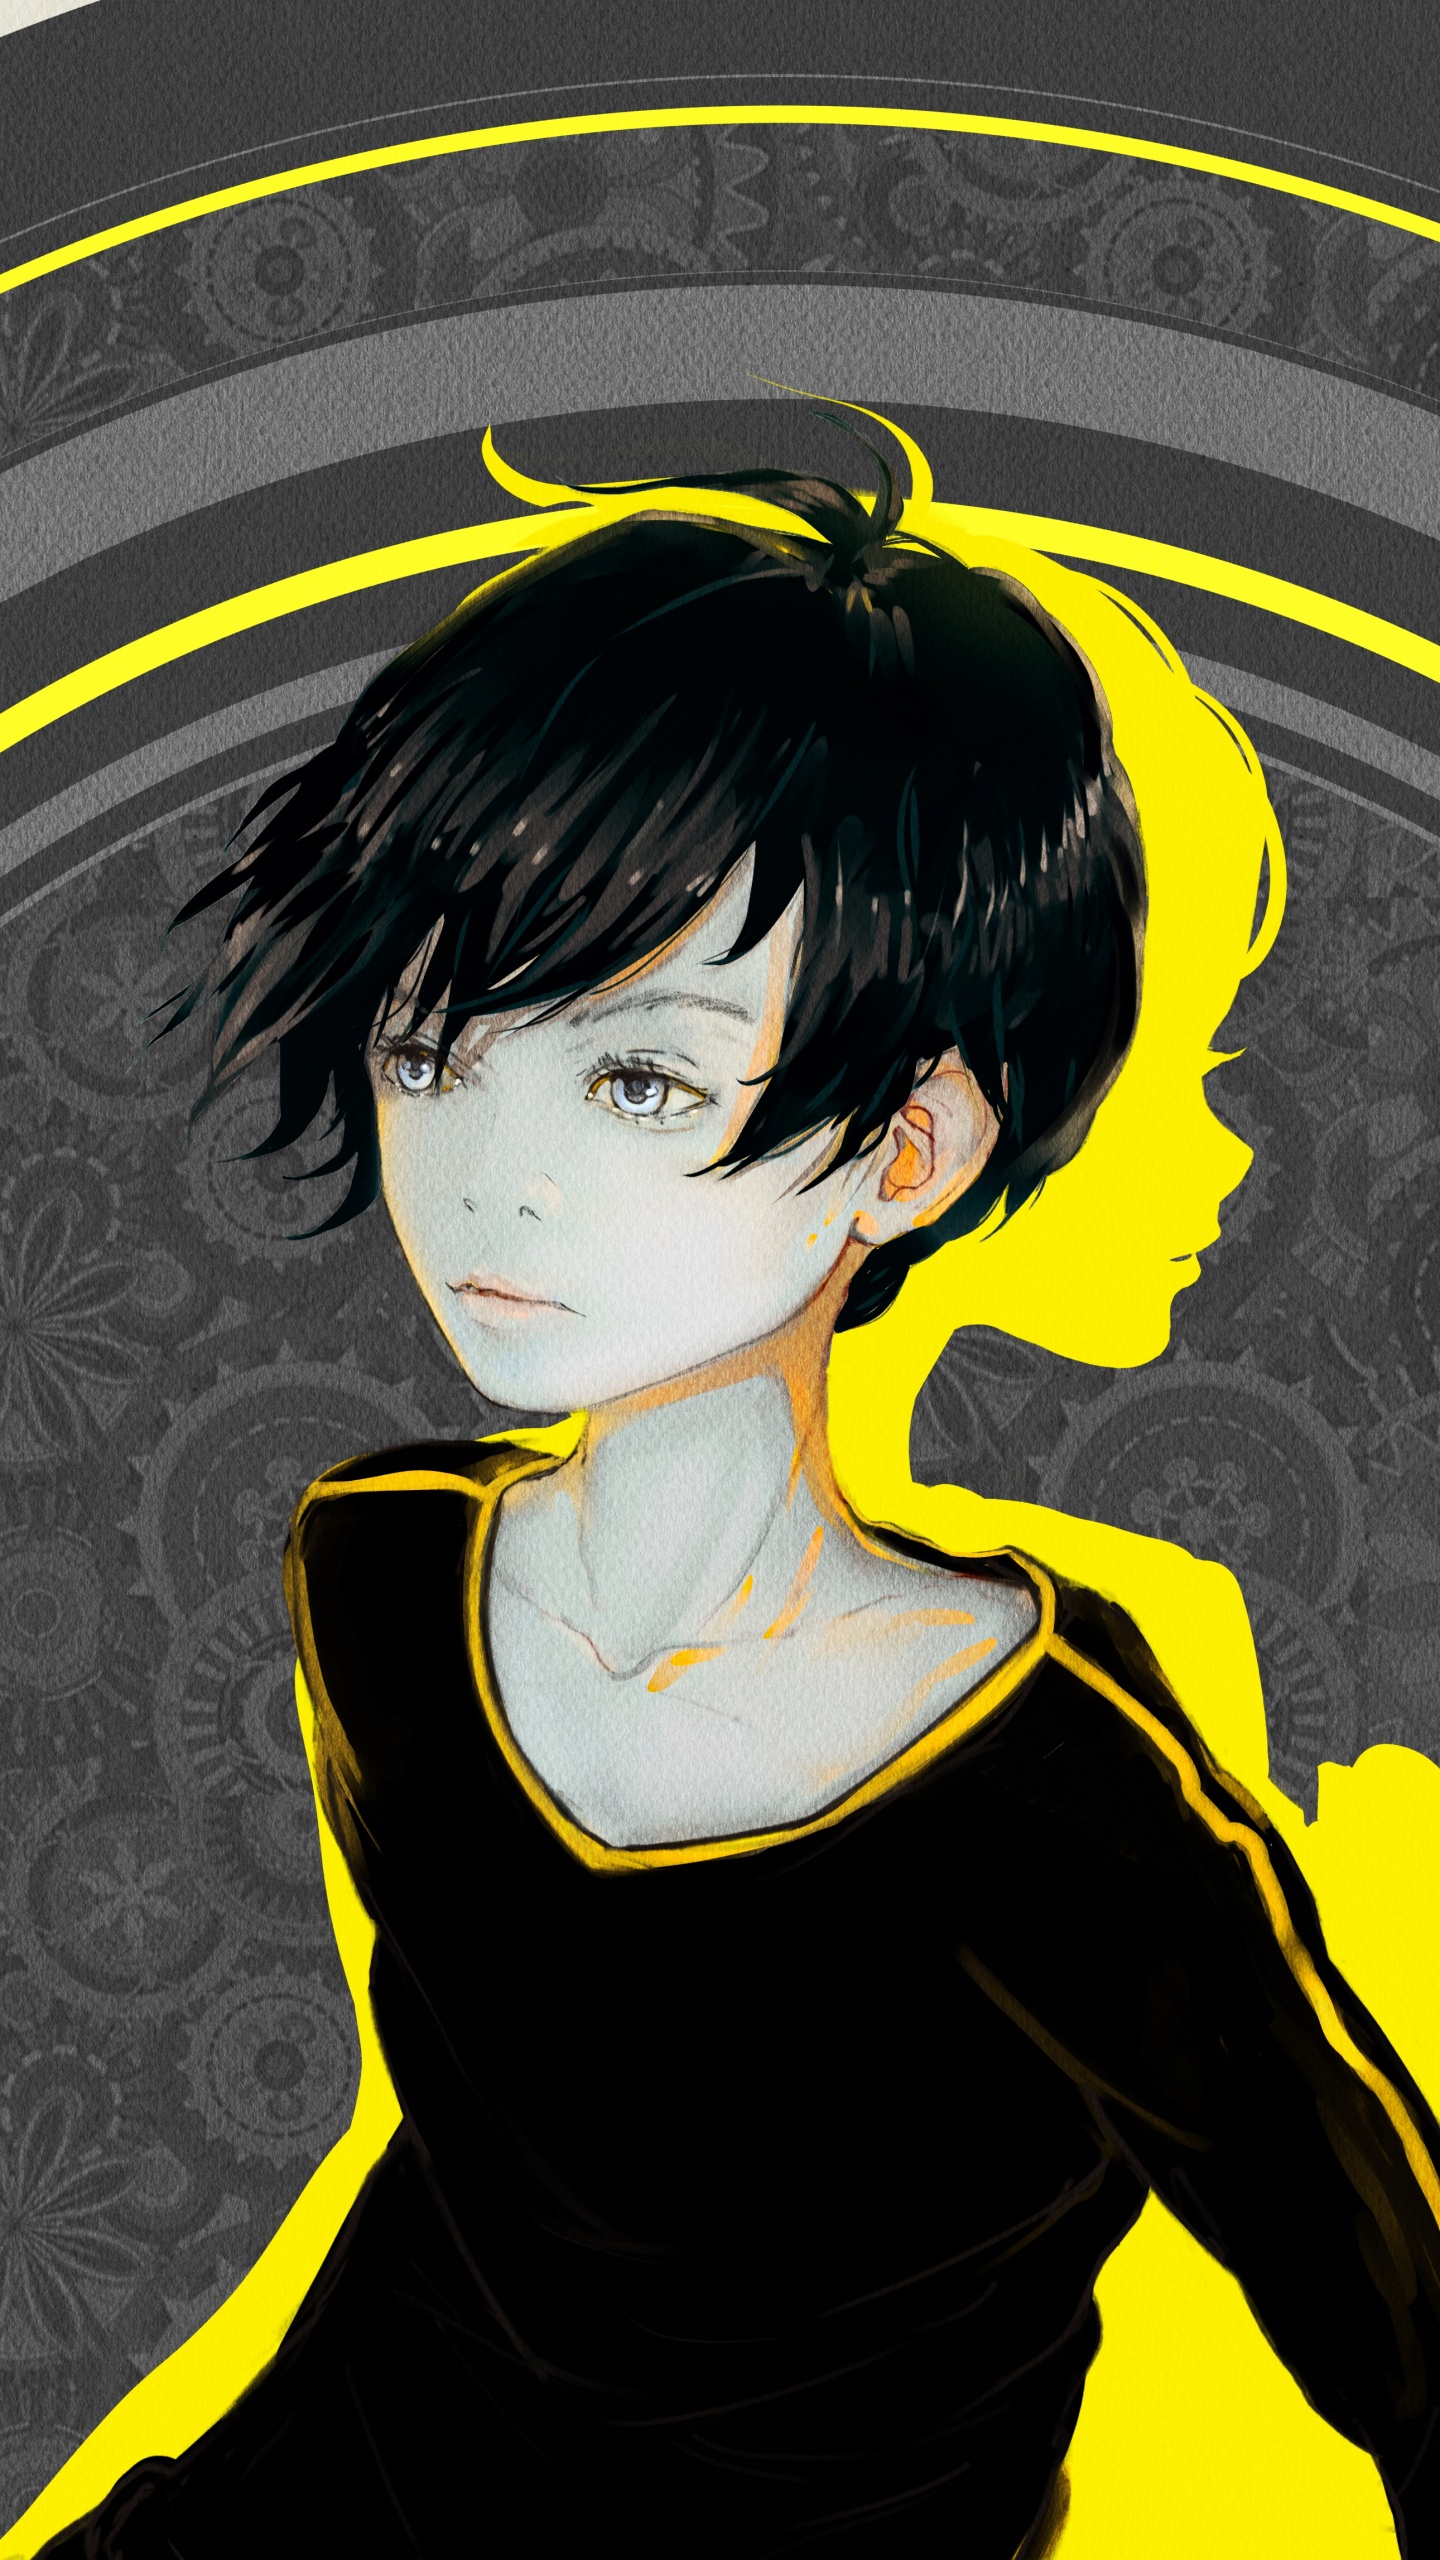 Black Haired Male Anime Character. Wallpaper in 1440x2560 Resolution